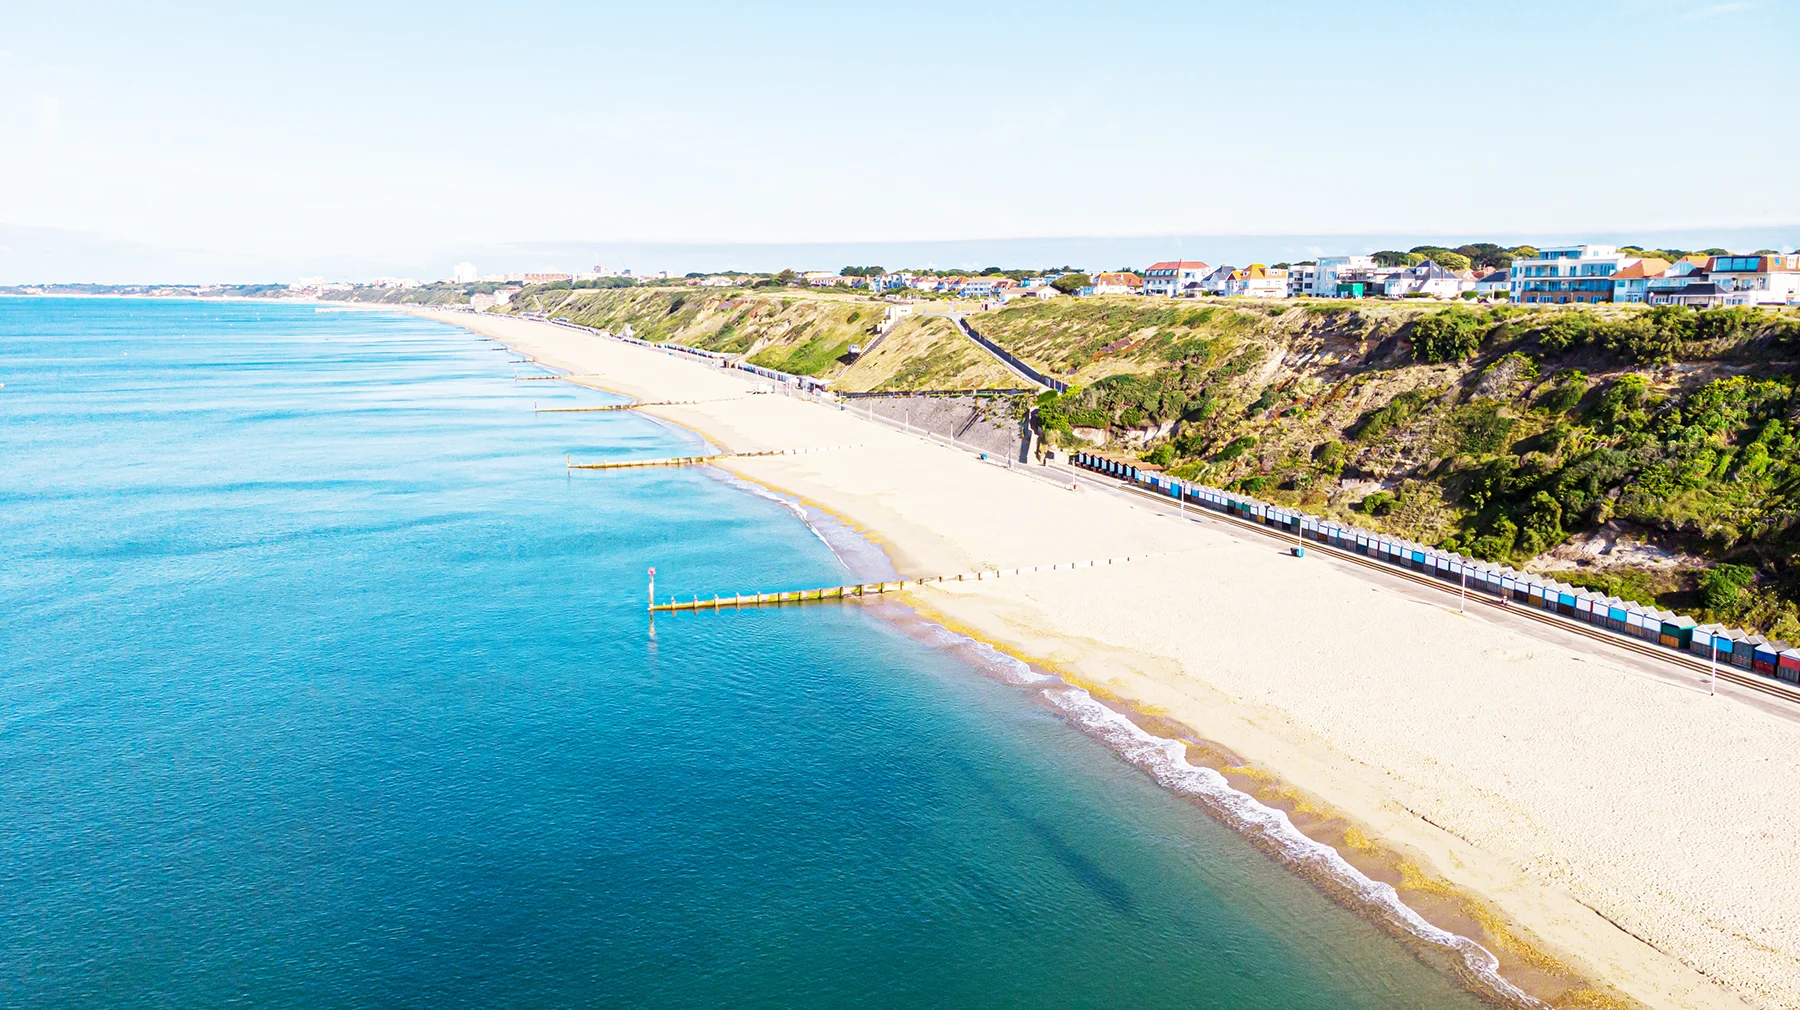 A bright blue sea and sandy beach next to a railway track with a train on it, and a row of beach huts. There is a grassy bank and houses on the other side. 